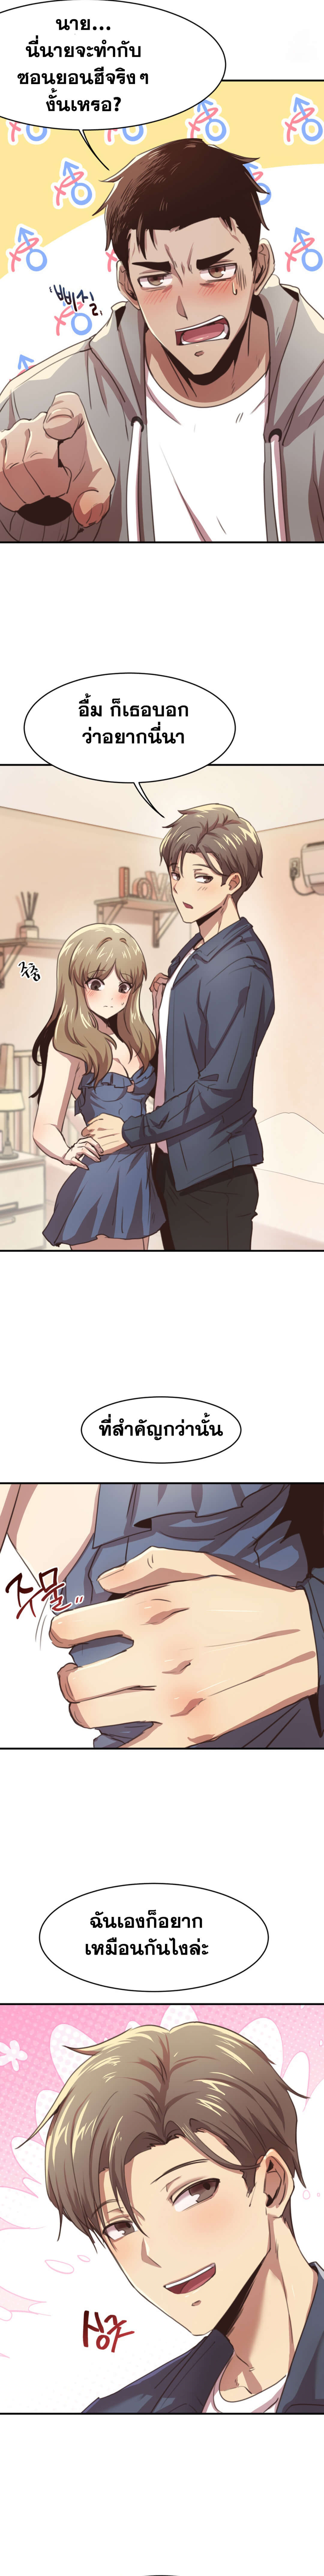 With My Brother’s Friends ตอนที่ 3 ภาพ 5